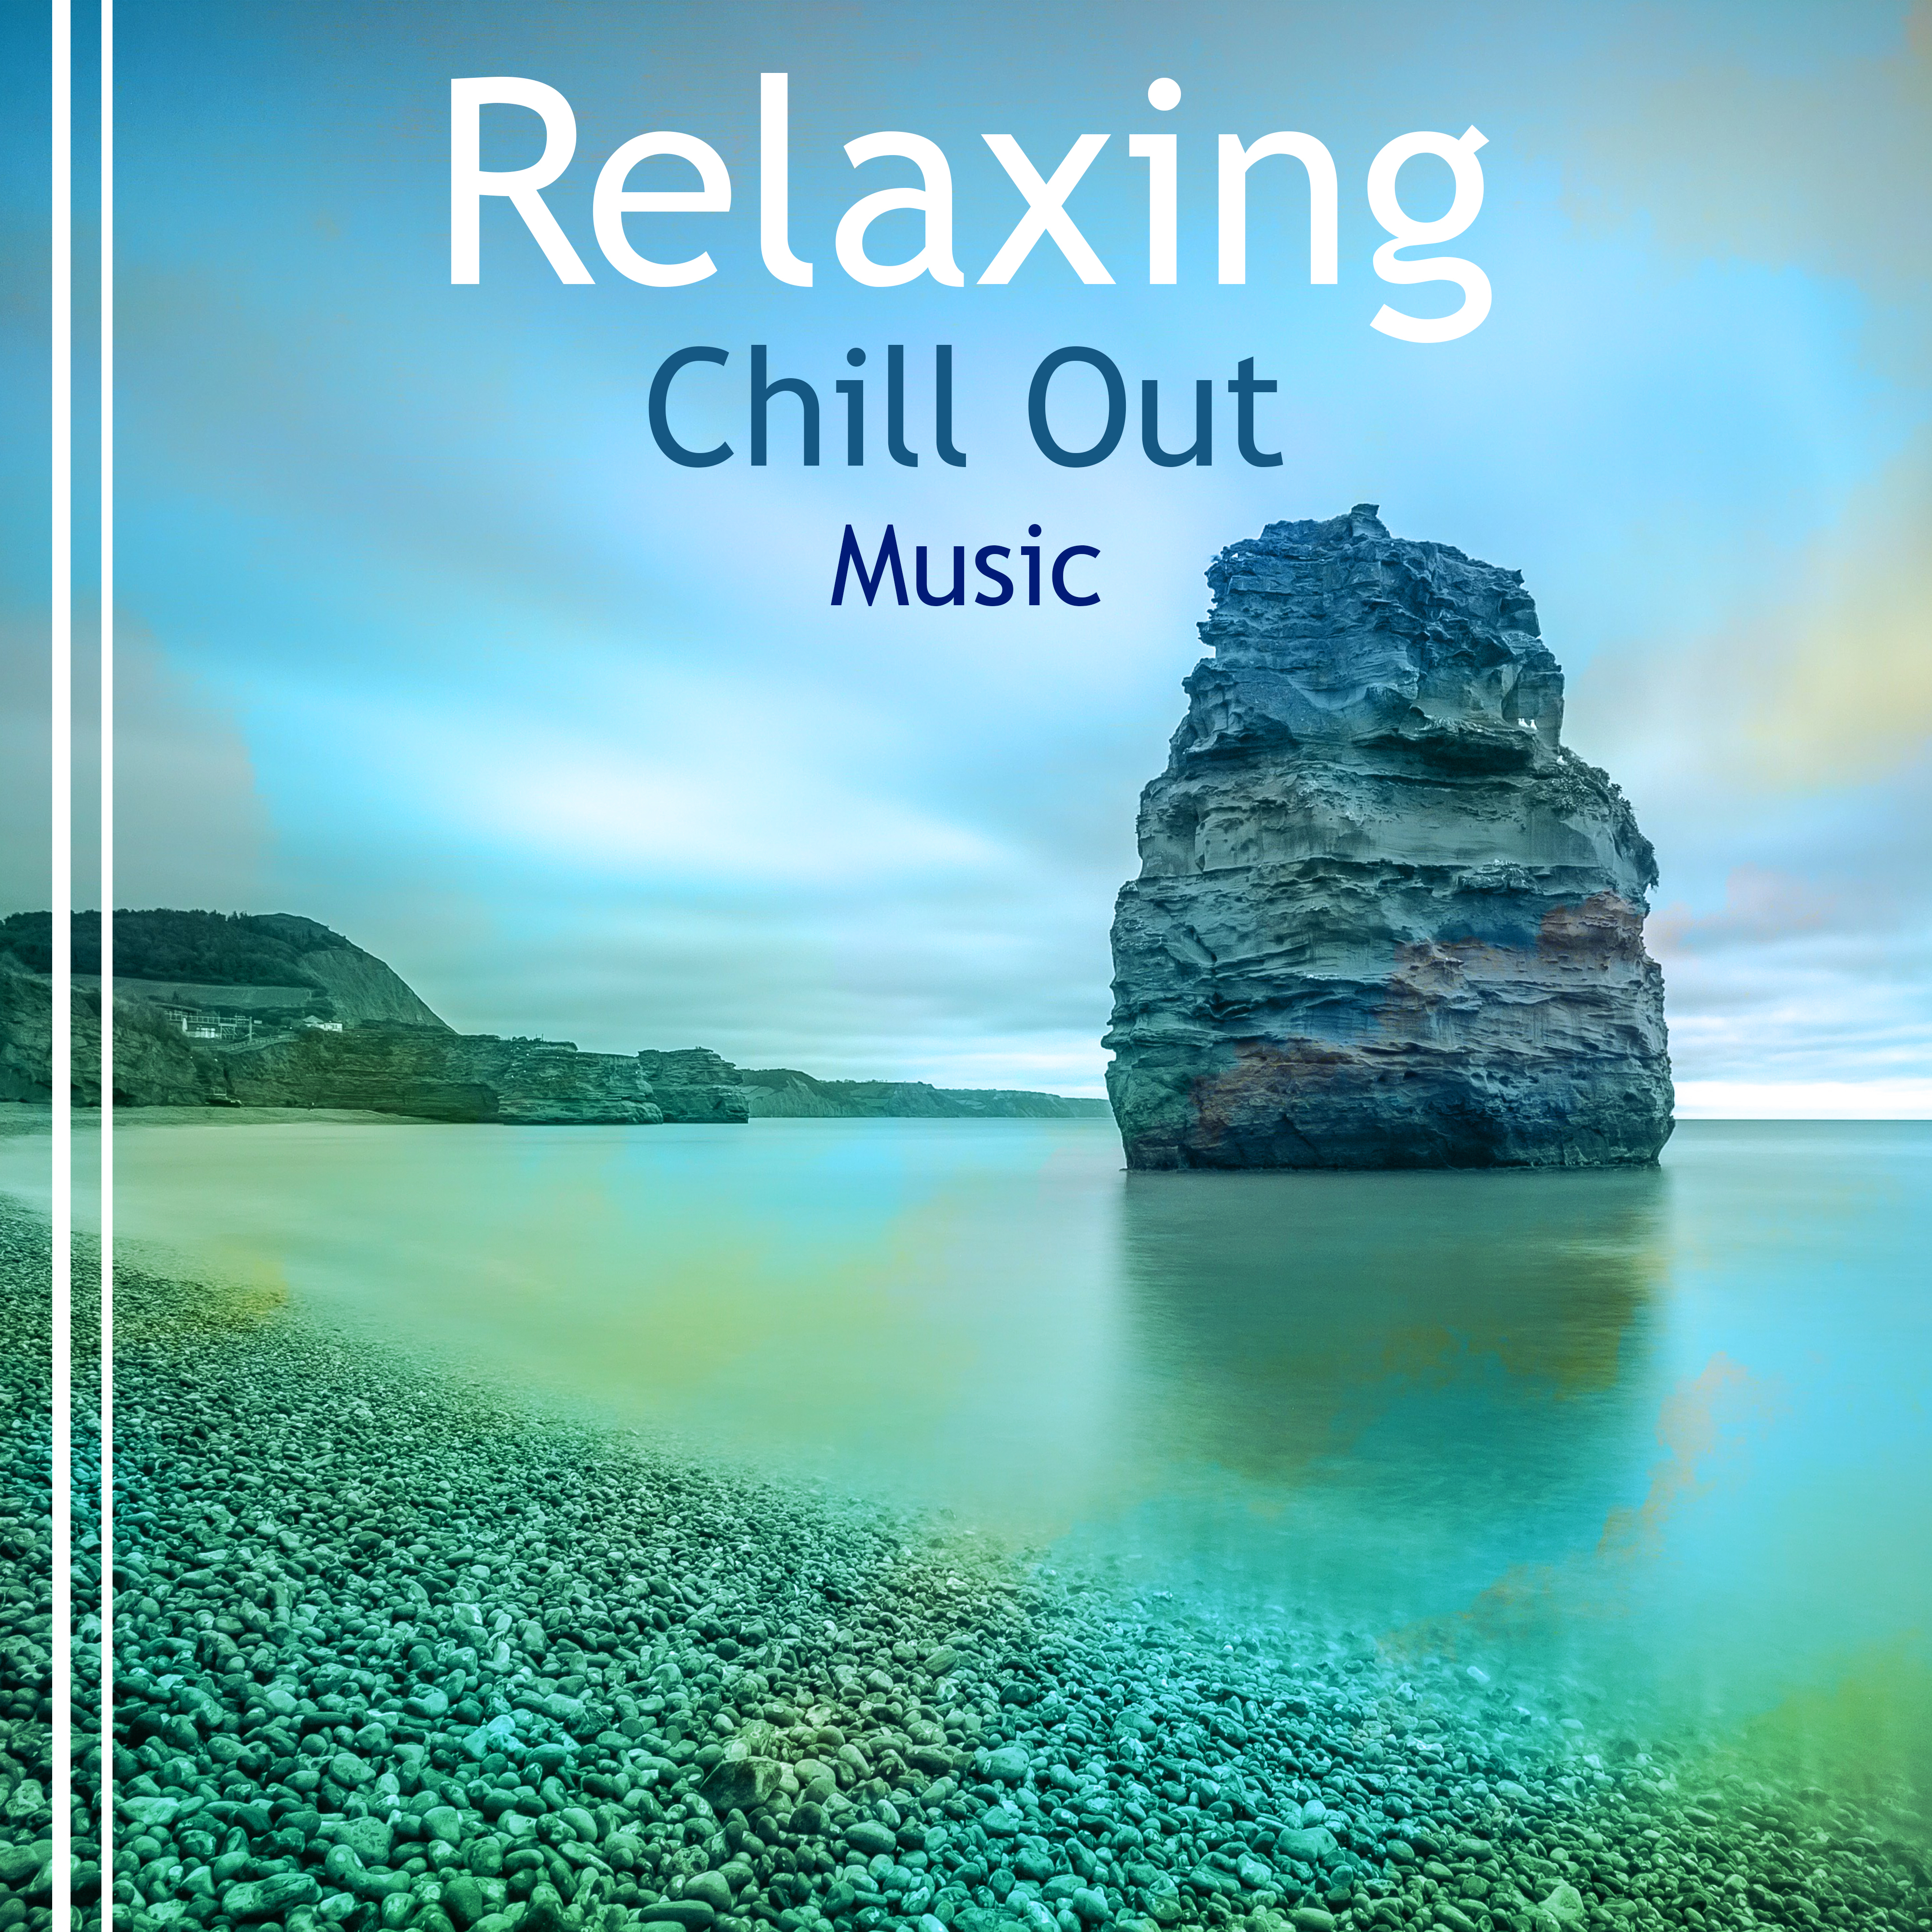 Relaxing Chill Out Music – Beach Relaxation, Sounds to Calm Down, Summer Vibes, Tropical Island